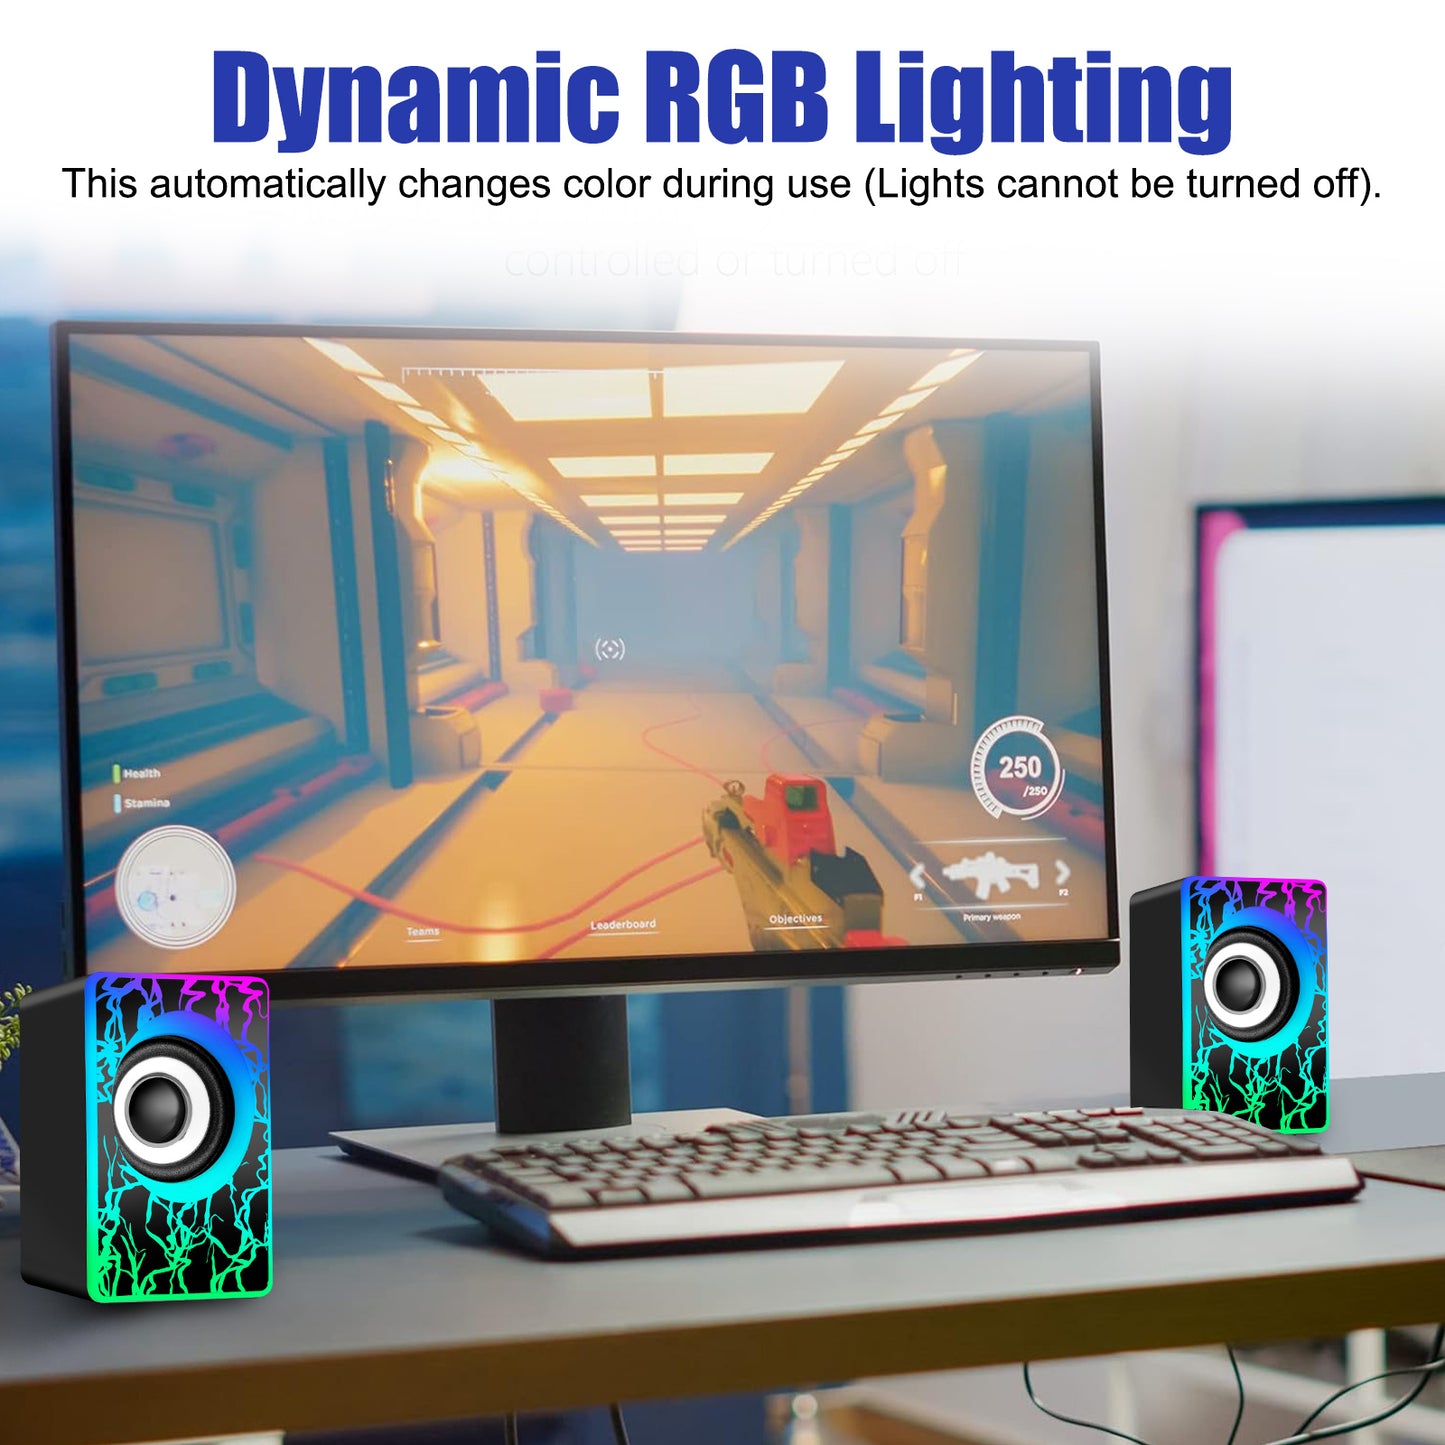 RGB Lighting usb wired small computer speakers - Subwoofer Stereo Bass Sound 3.5mm,for desktops laptops smartphones tablets